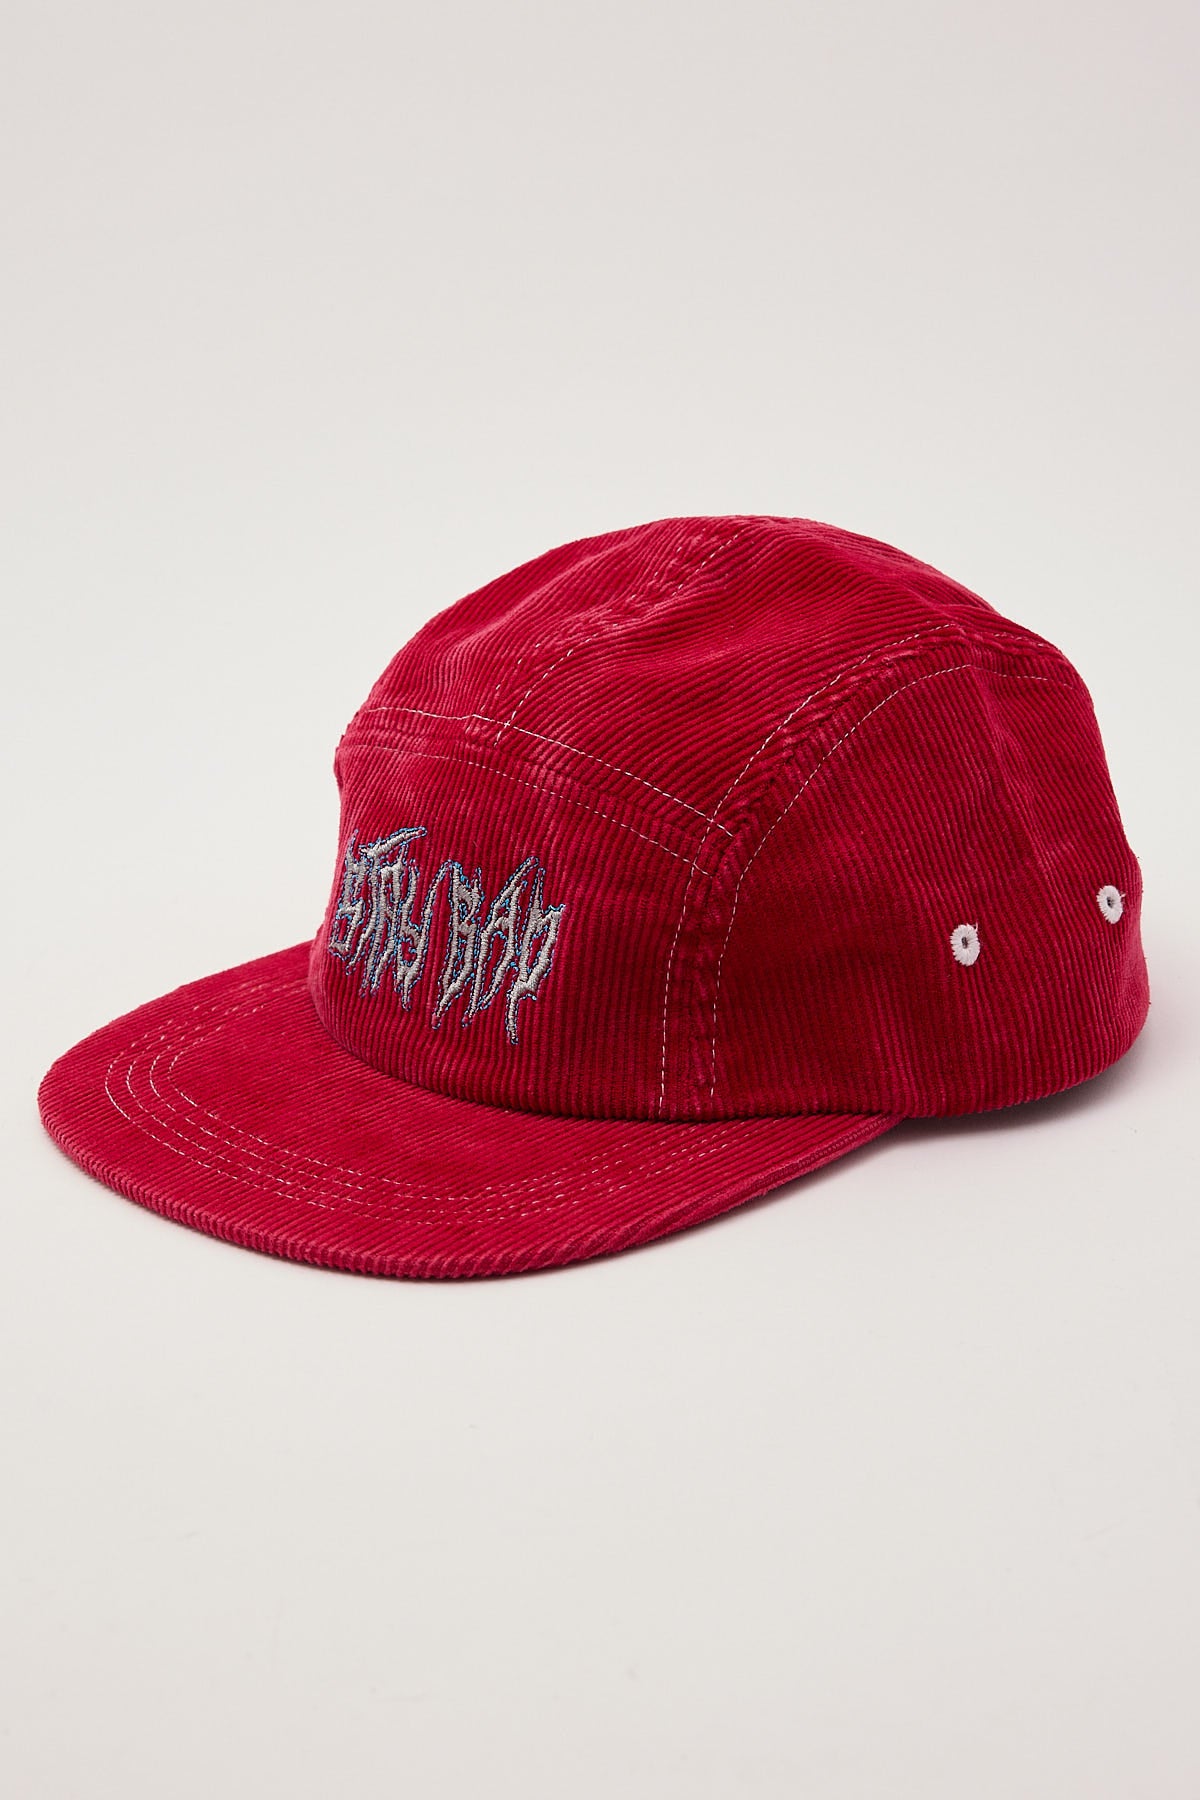 Billy Bones Club Stay Bad 5 Panel Red Cord